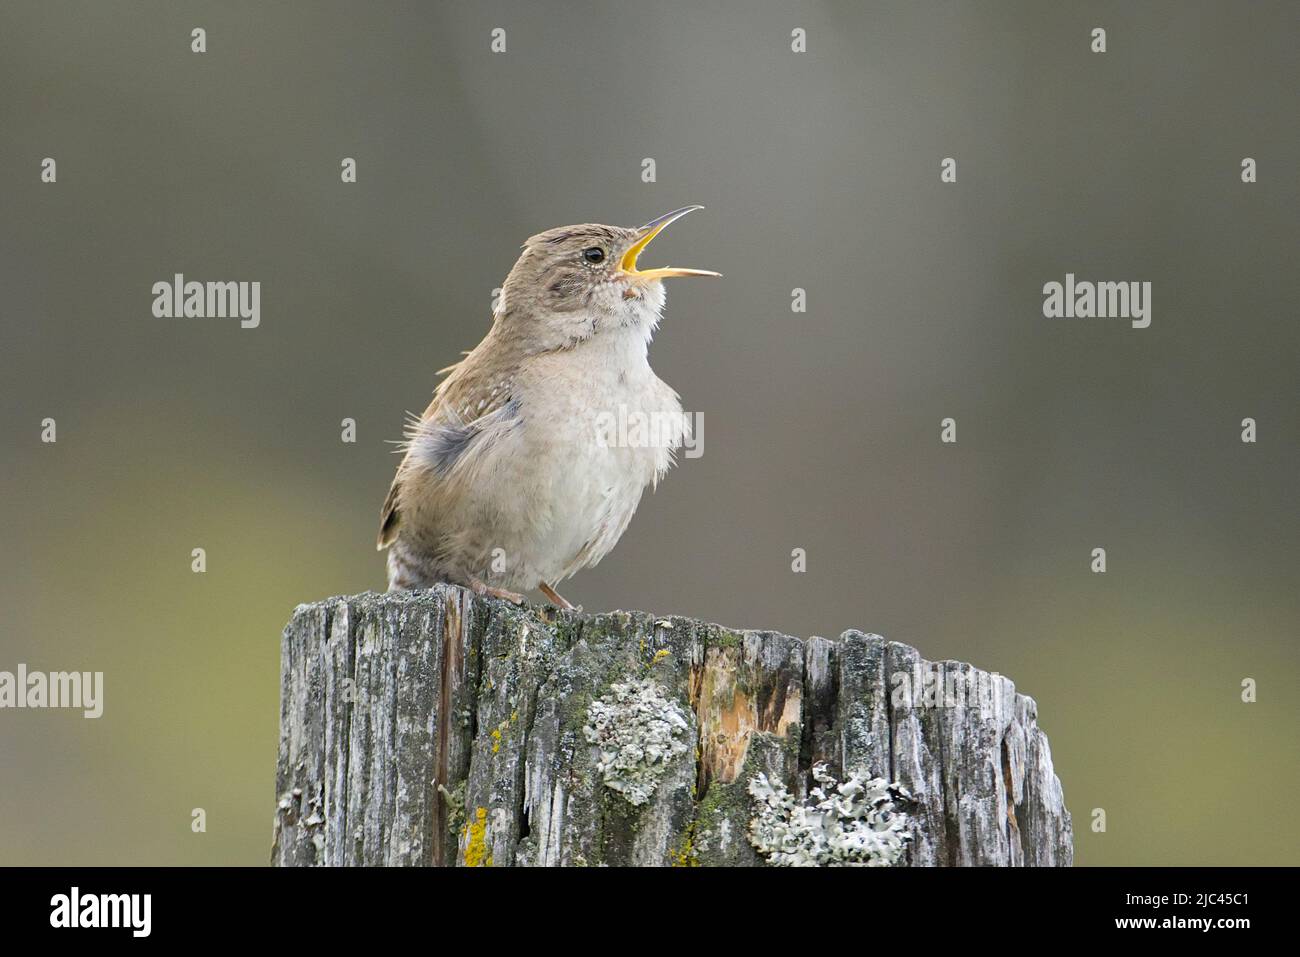 A small wren is perched on a post singing loudly in north Idaho. Stock Photo